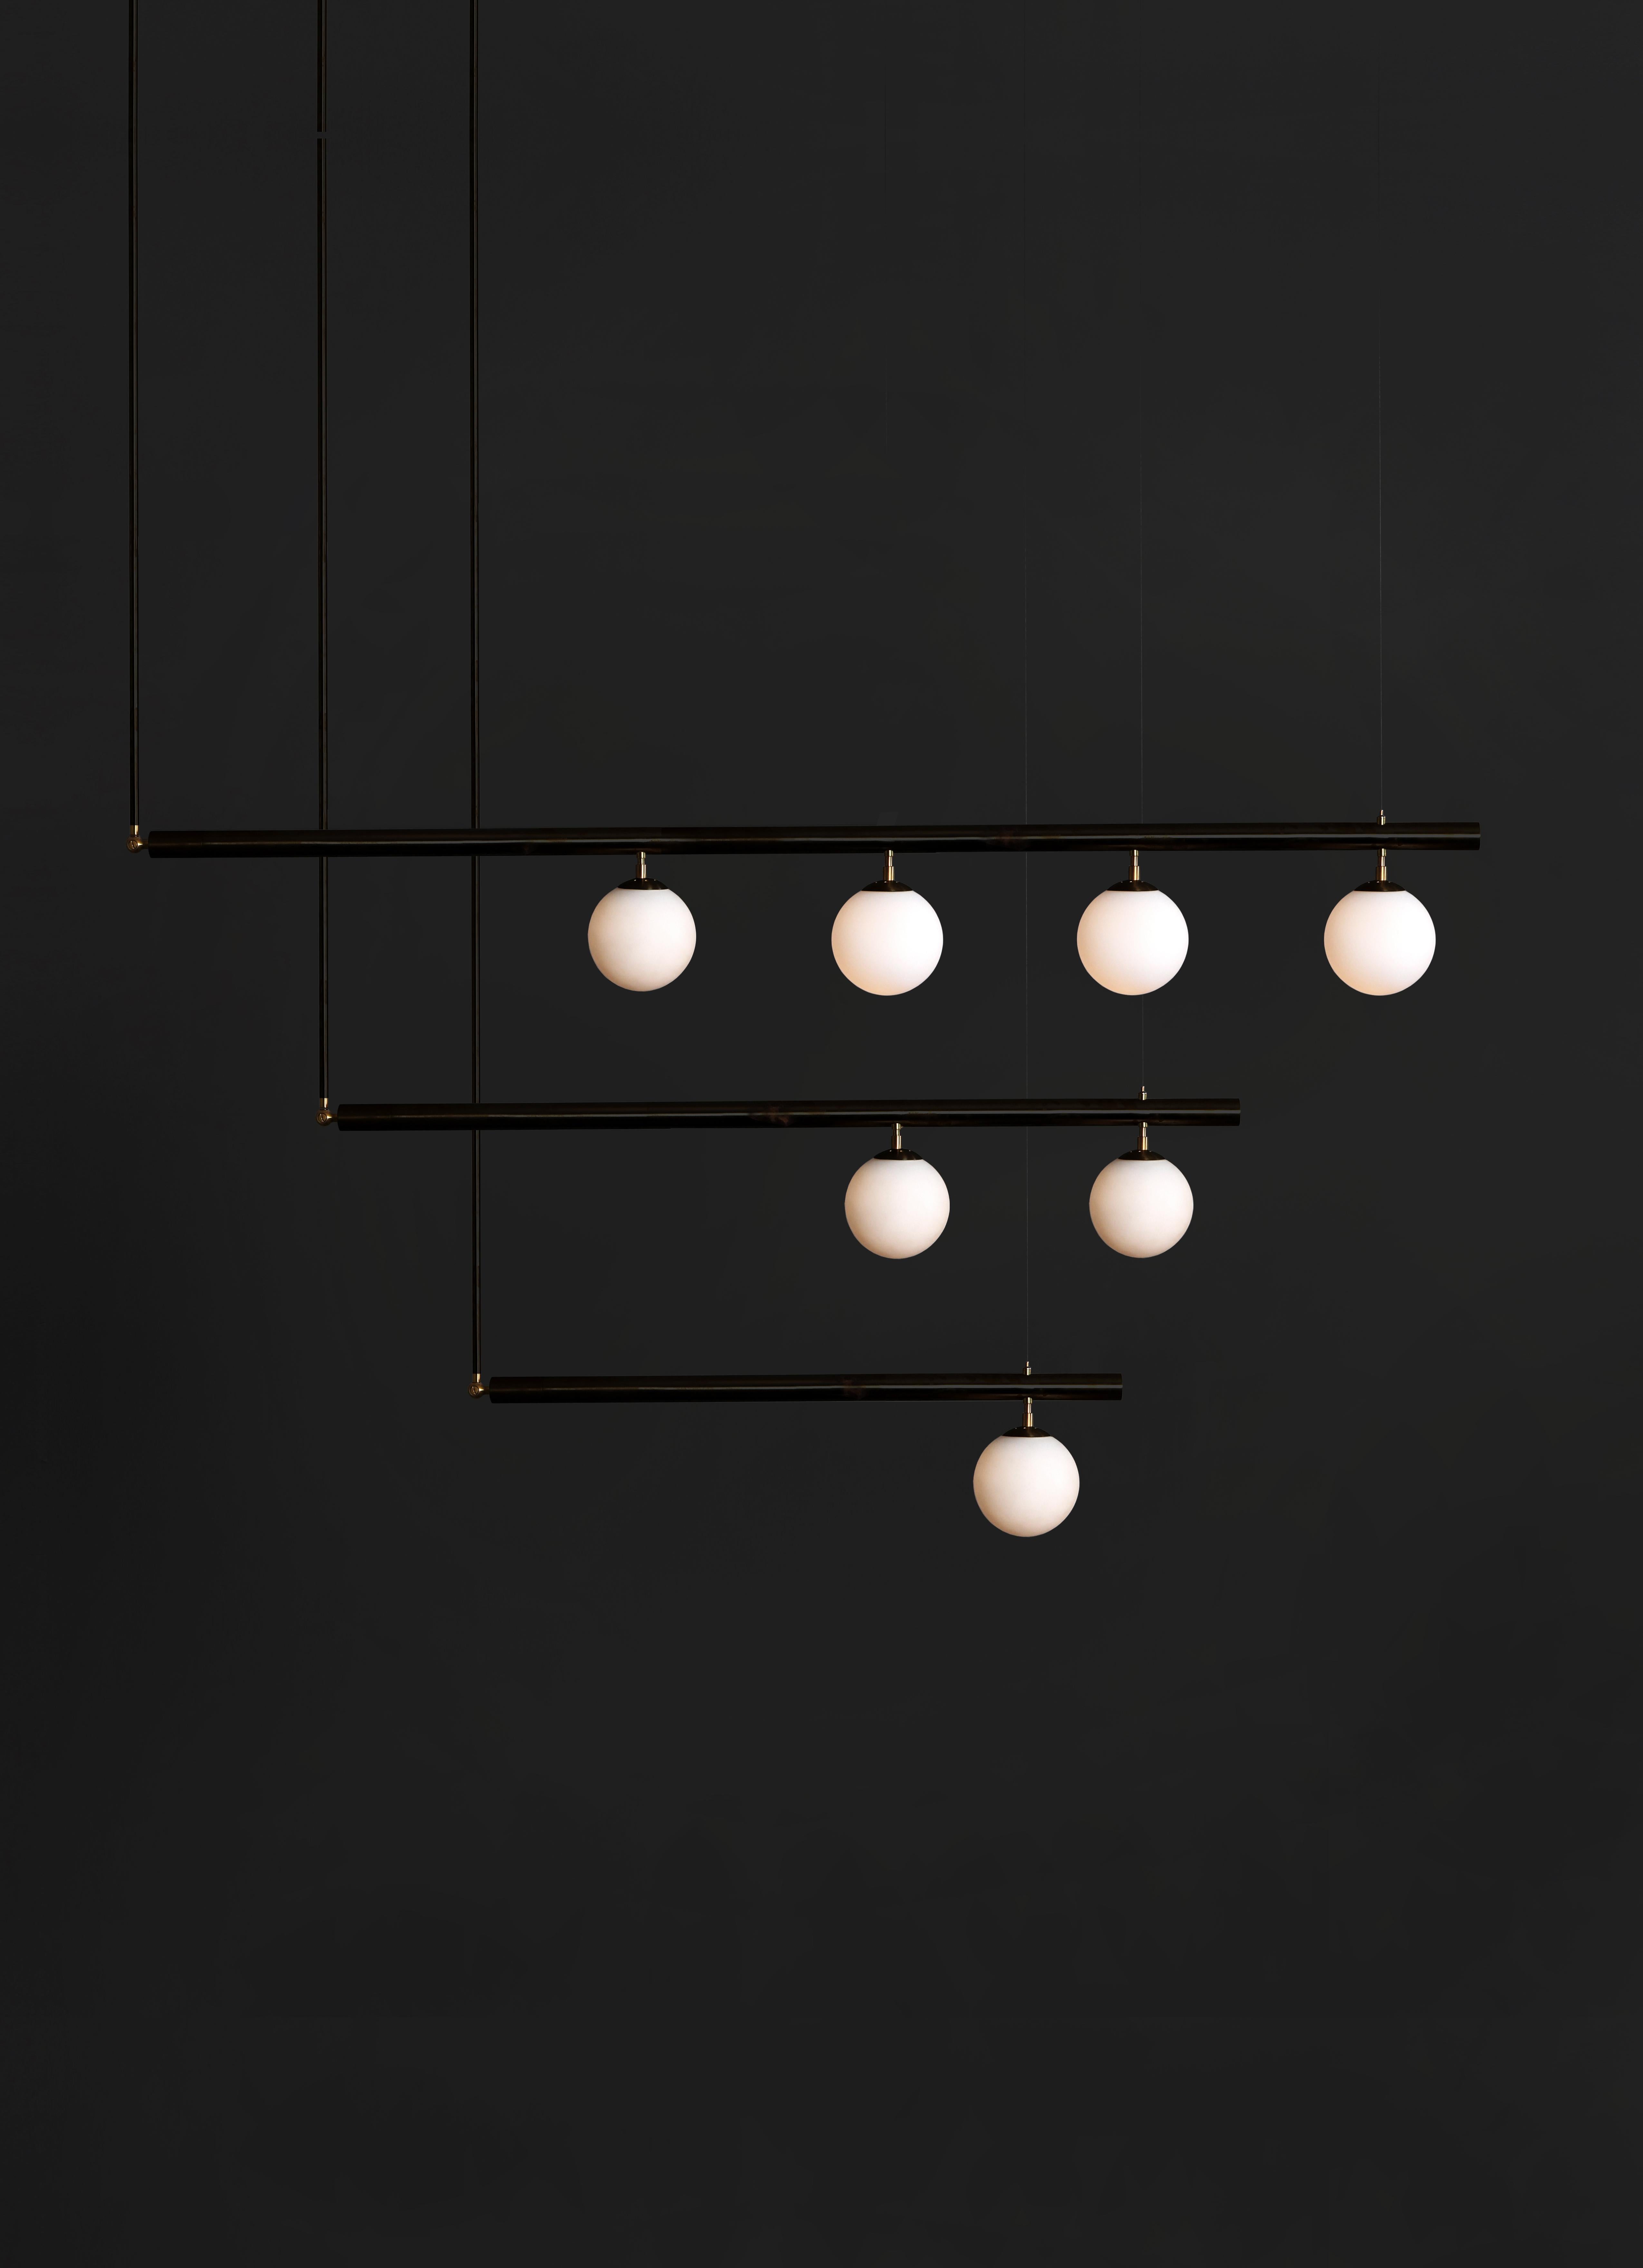 Set of black satellite I II IV sculpted pendant by Paul Matter
Blackened brass with brushed brass details
Dimensions: 182 x 89 x 15.2 cm
182 x 129 x 15.2 cm
182 x 180 x 15.2 cm
 
Satellite is inspired by the conceptual and Minimalist movement of the